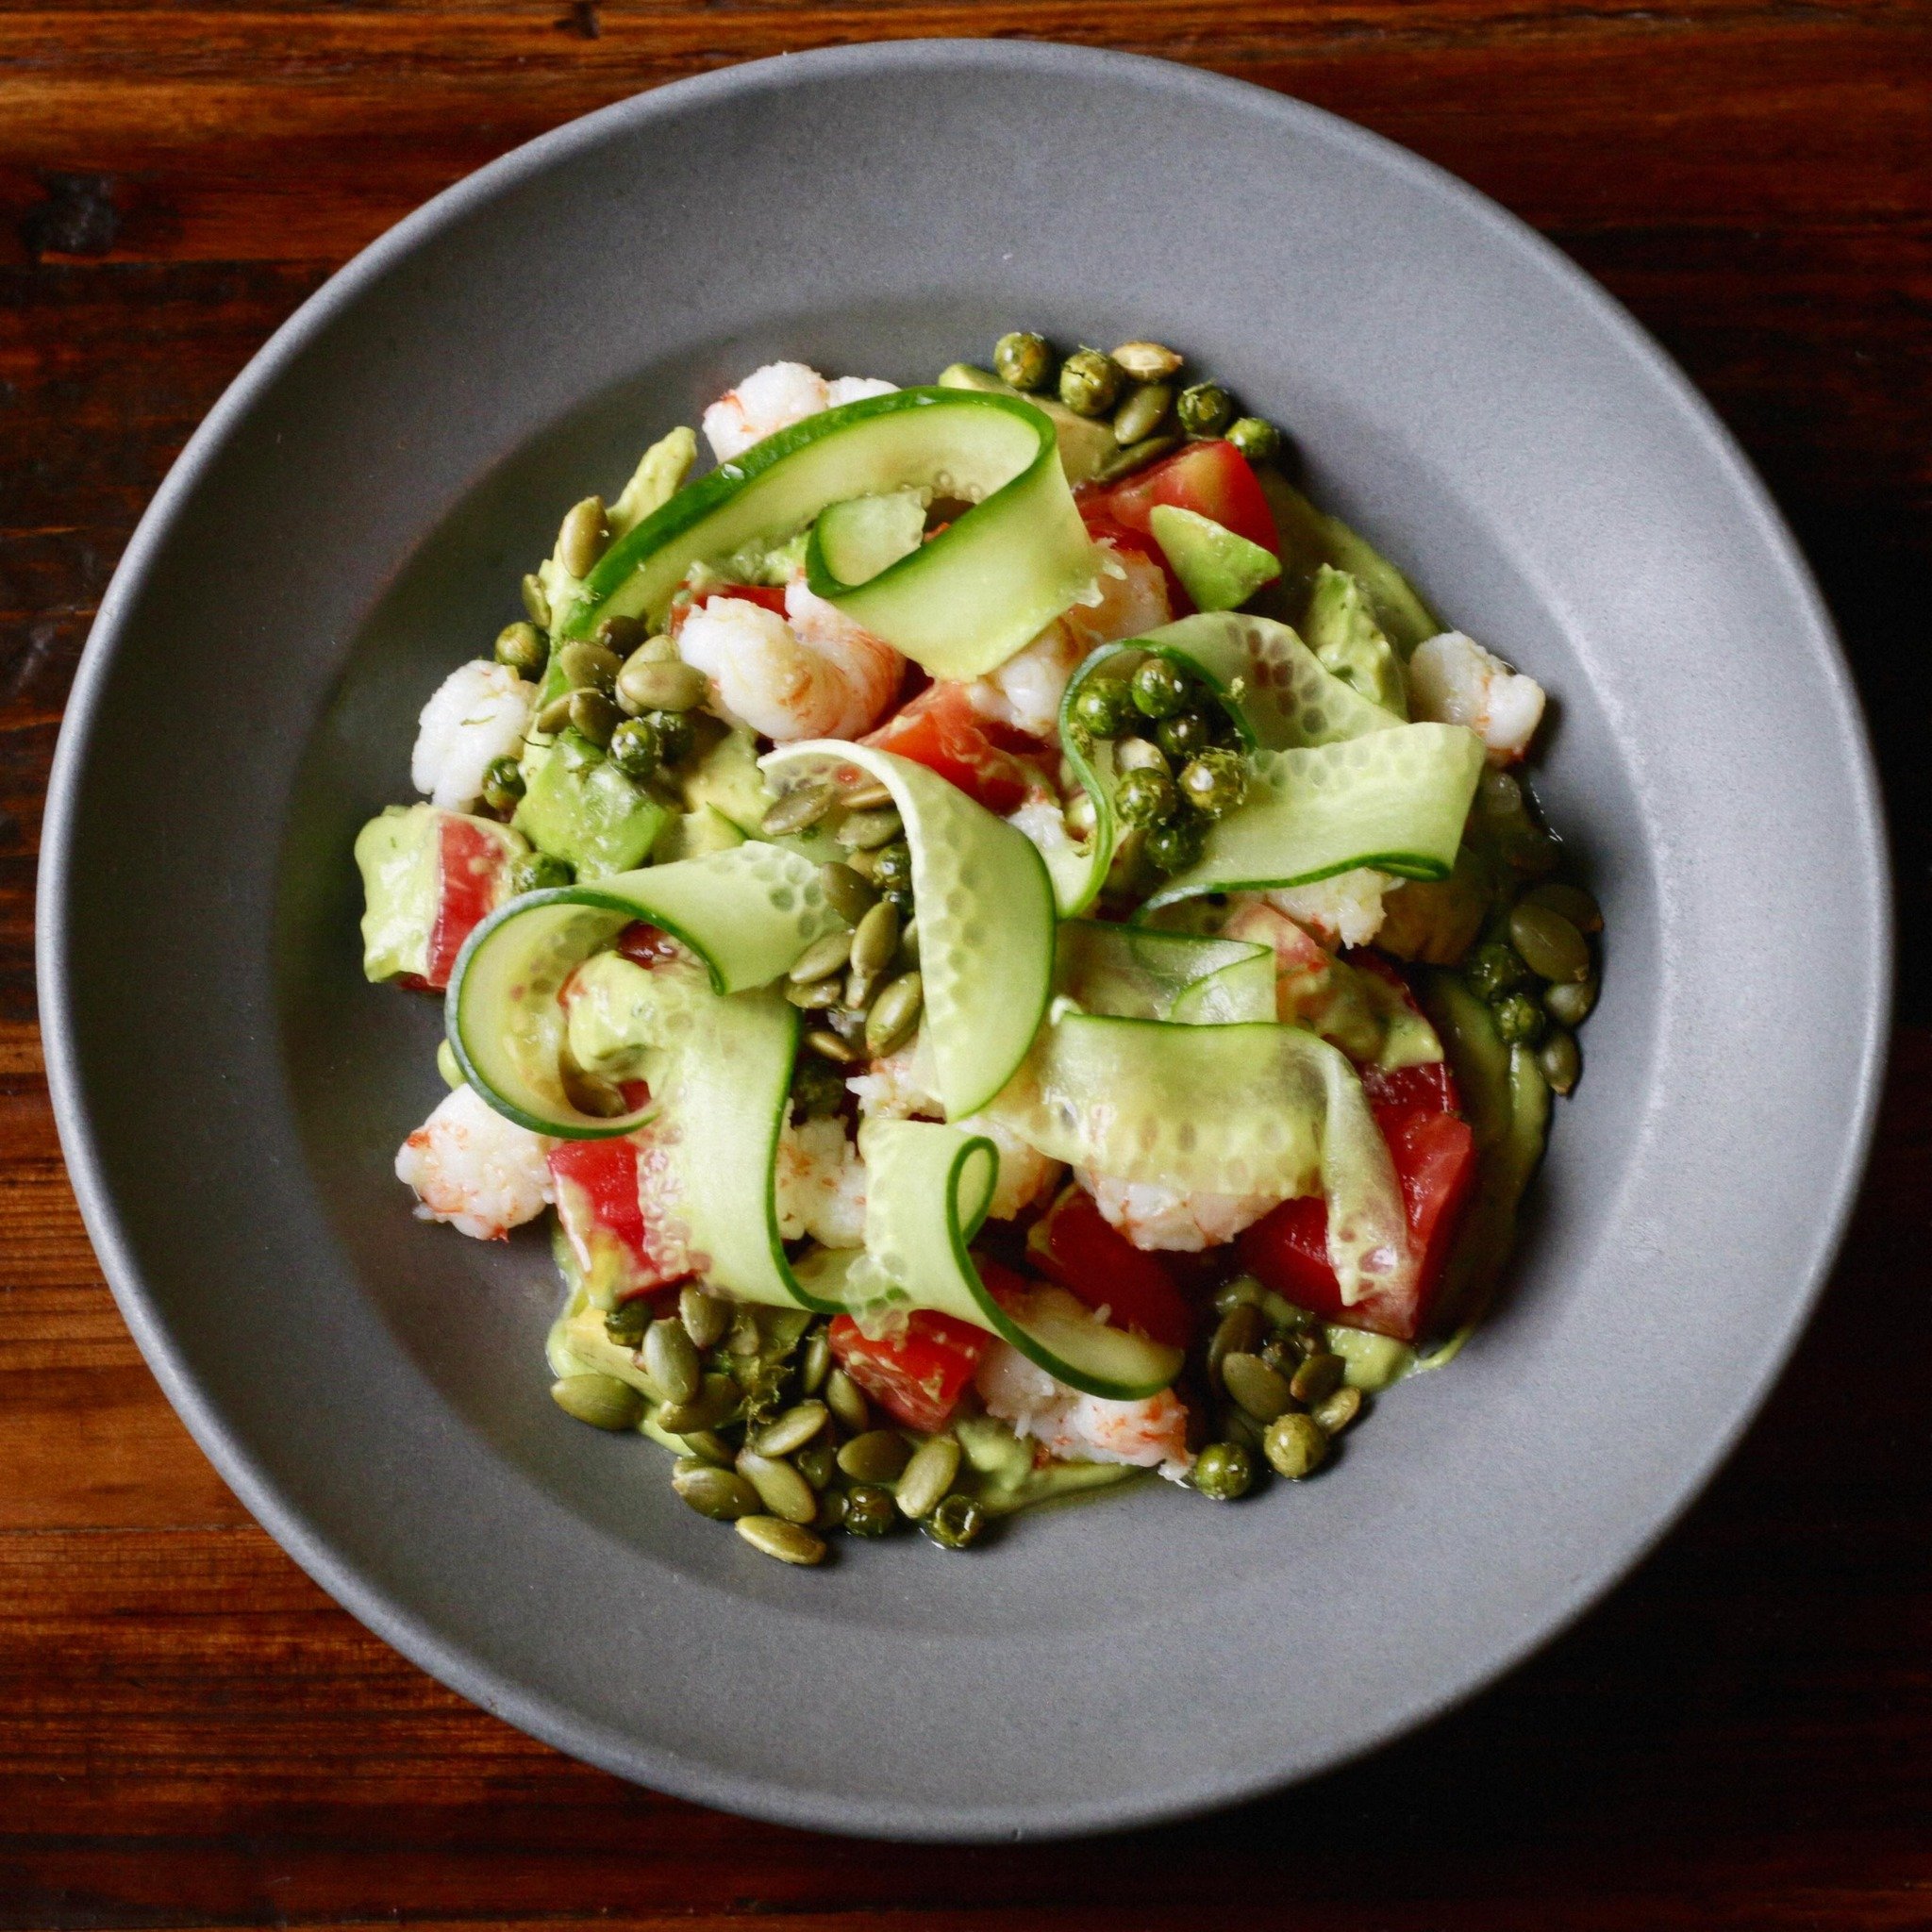 Spring shrimp salad 🍤 pickled rock shrimp, @woodlandgardensathens&rsquo; first heritage tomatoes of the season, katrina cucumbers, avocado, and pea and pepita condiment. On special tonight :)